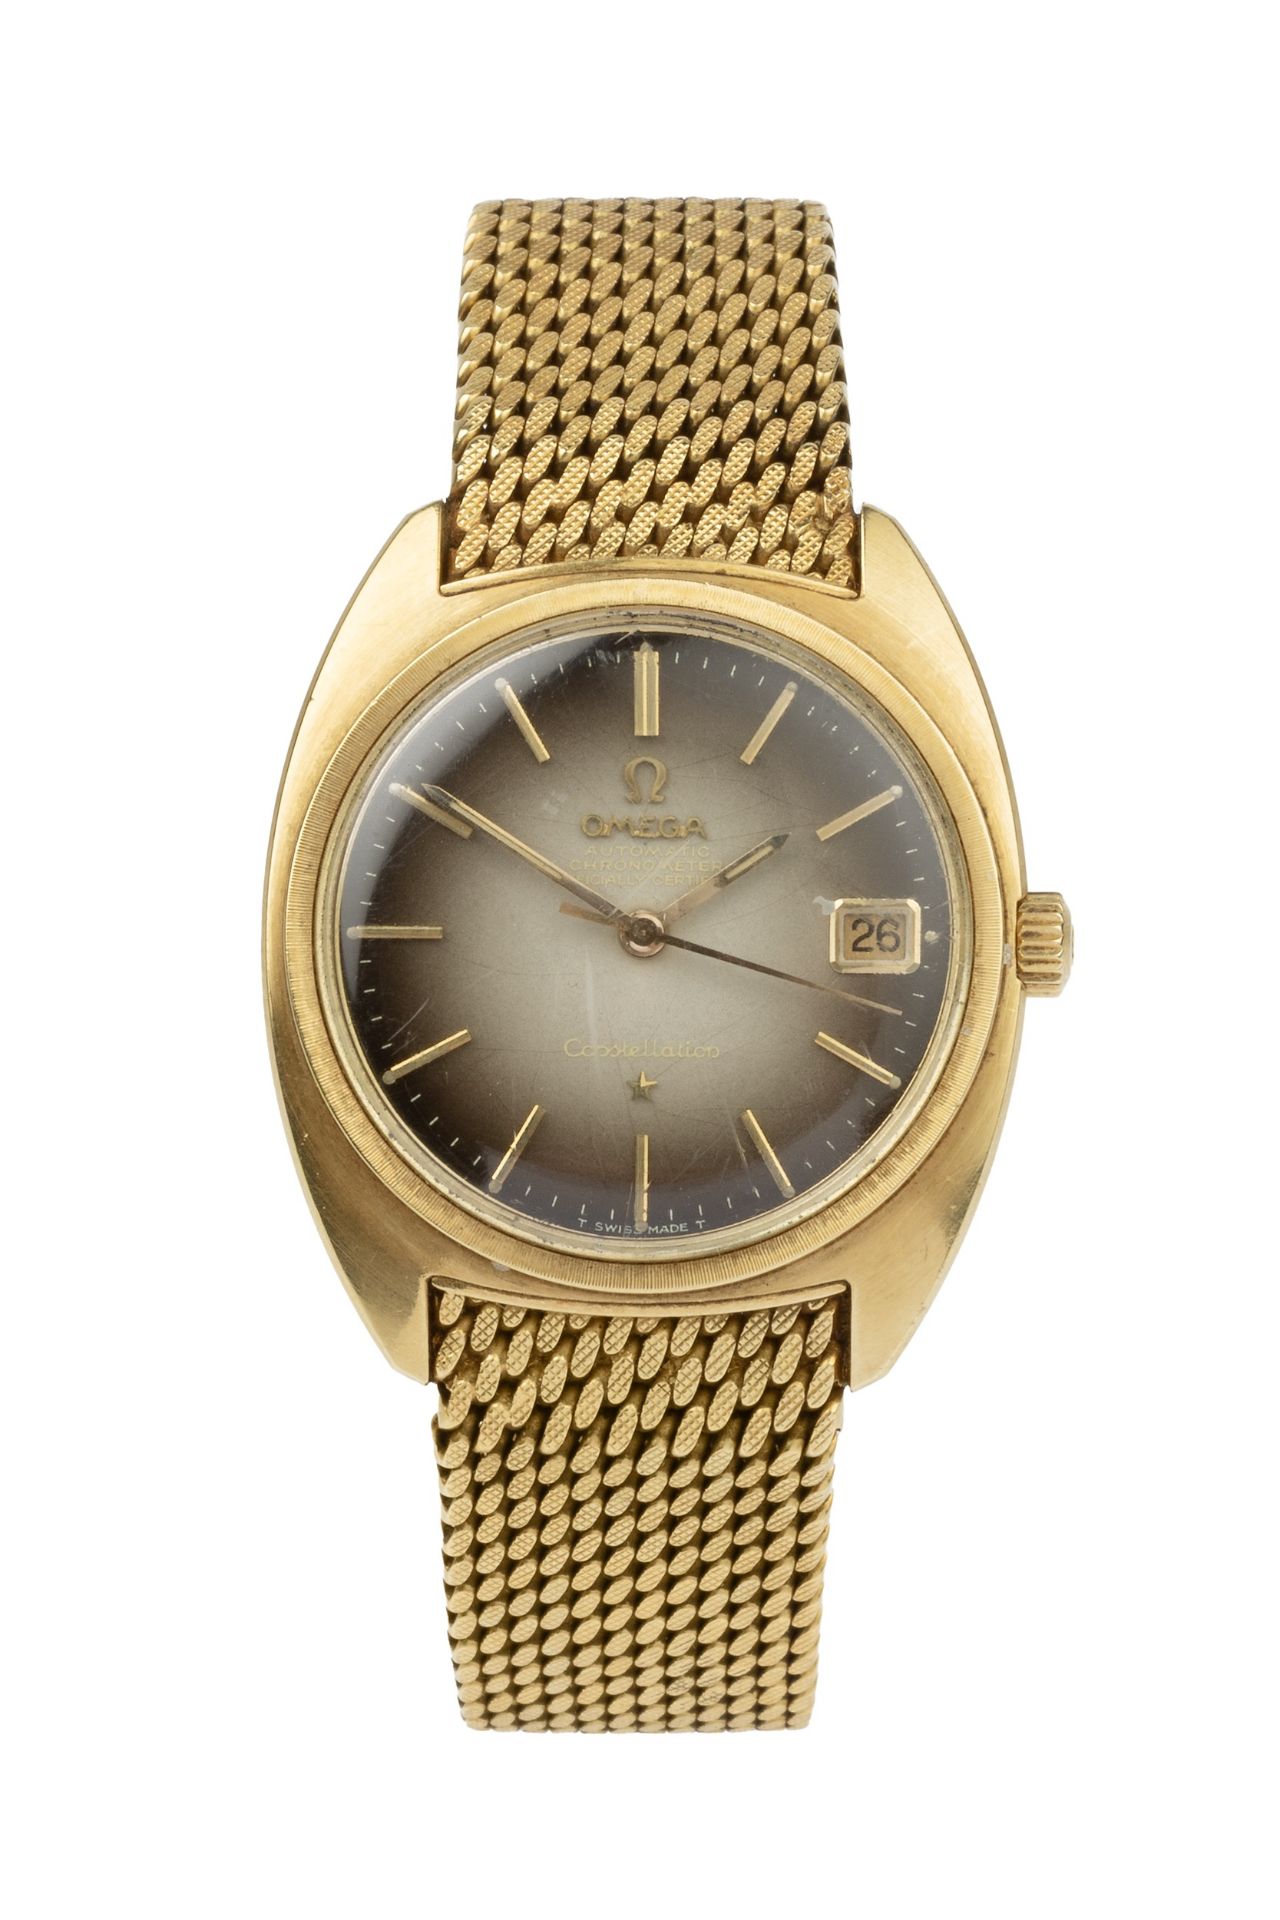 An 18ct gold gentleman's Omega Constellation automatic chronometer, circa 1966, the two-tone dial